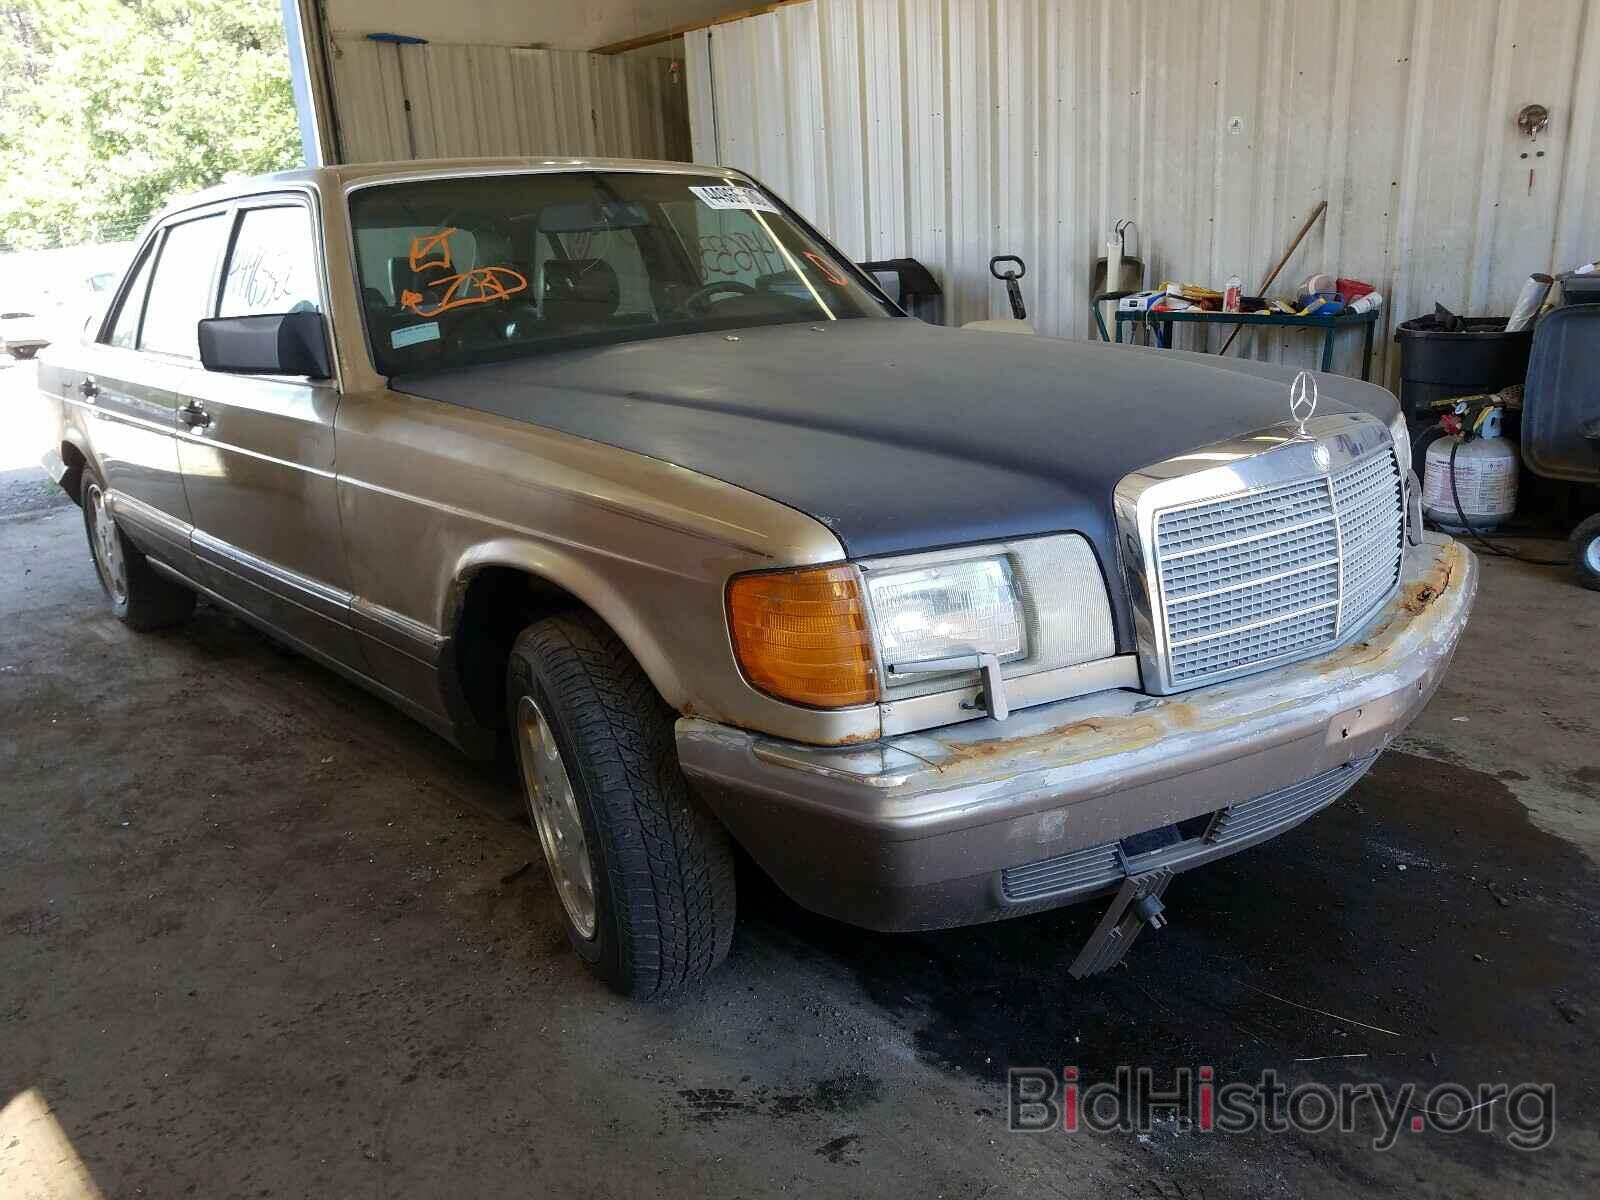 Photo WDBCB25036A257848 - MERCEDES-BENZ ALL OTHER 1986